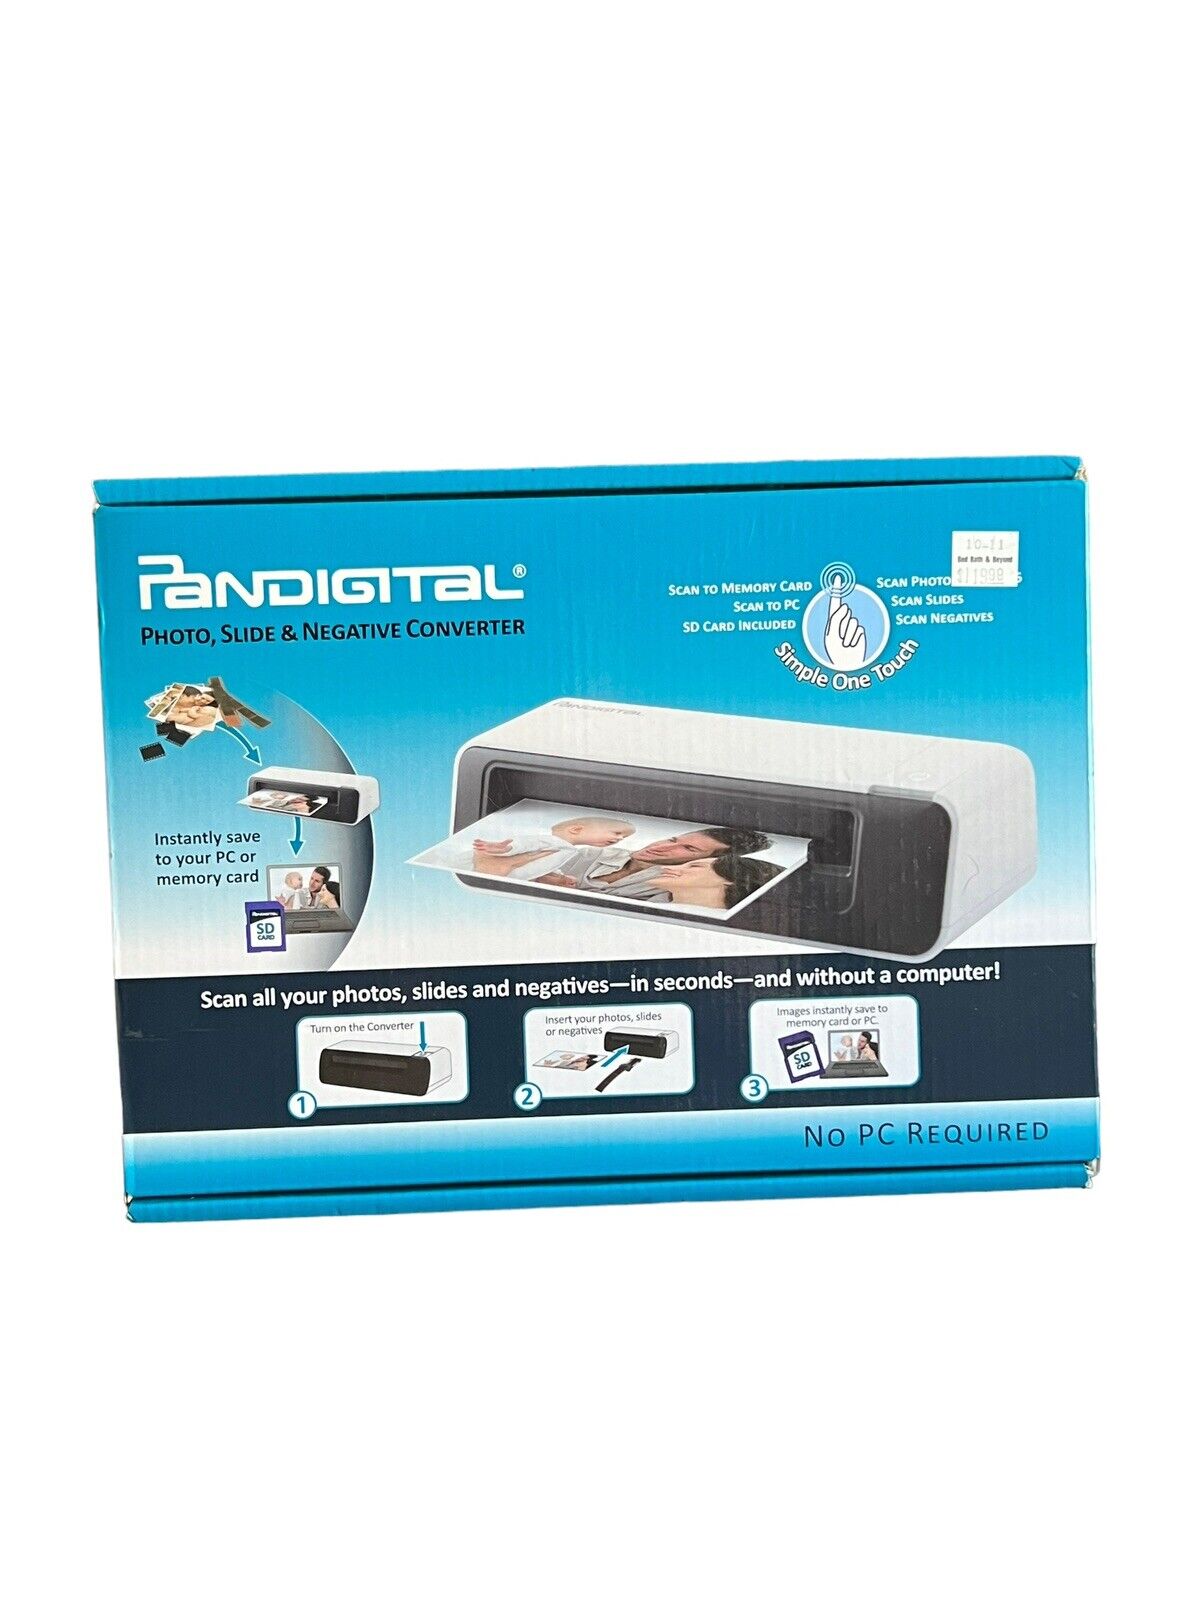 Pandigital Photo, Slide & Negative Converter One Touch Scan No PC Required